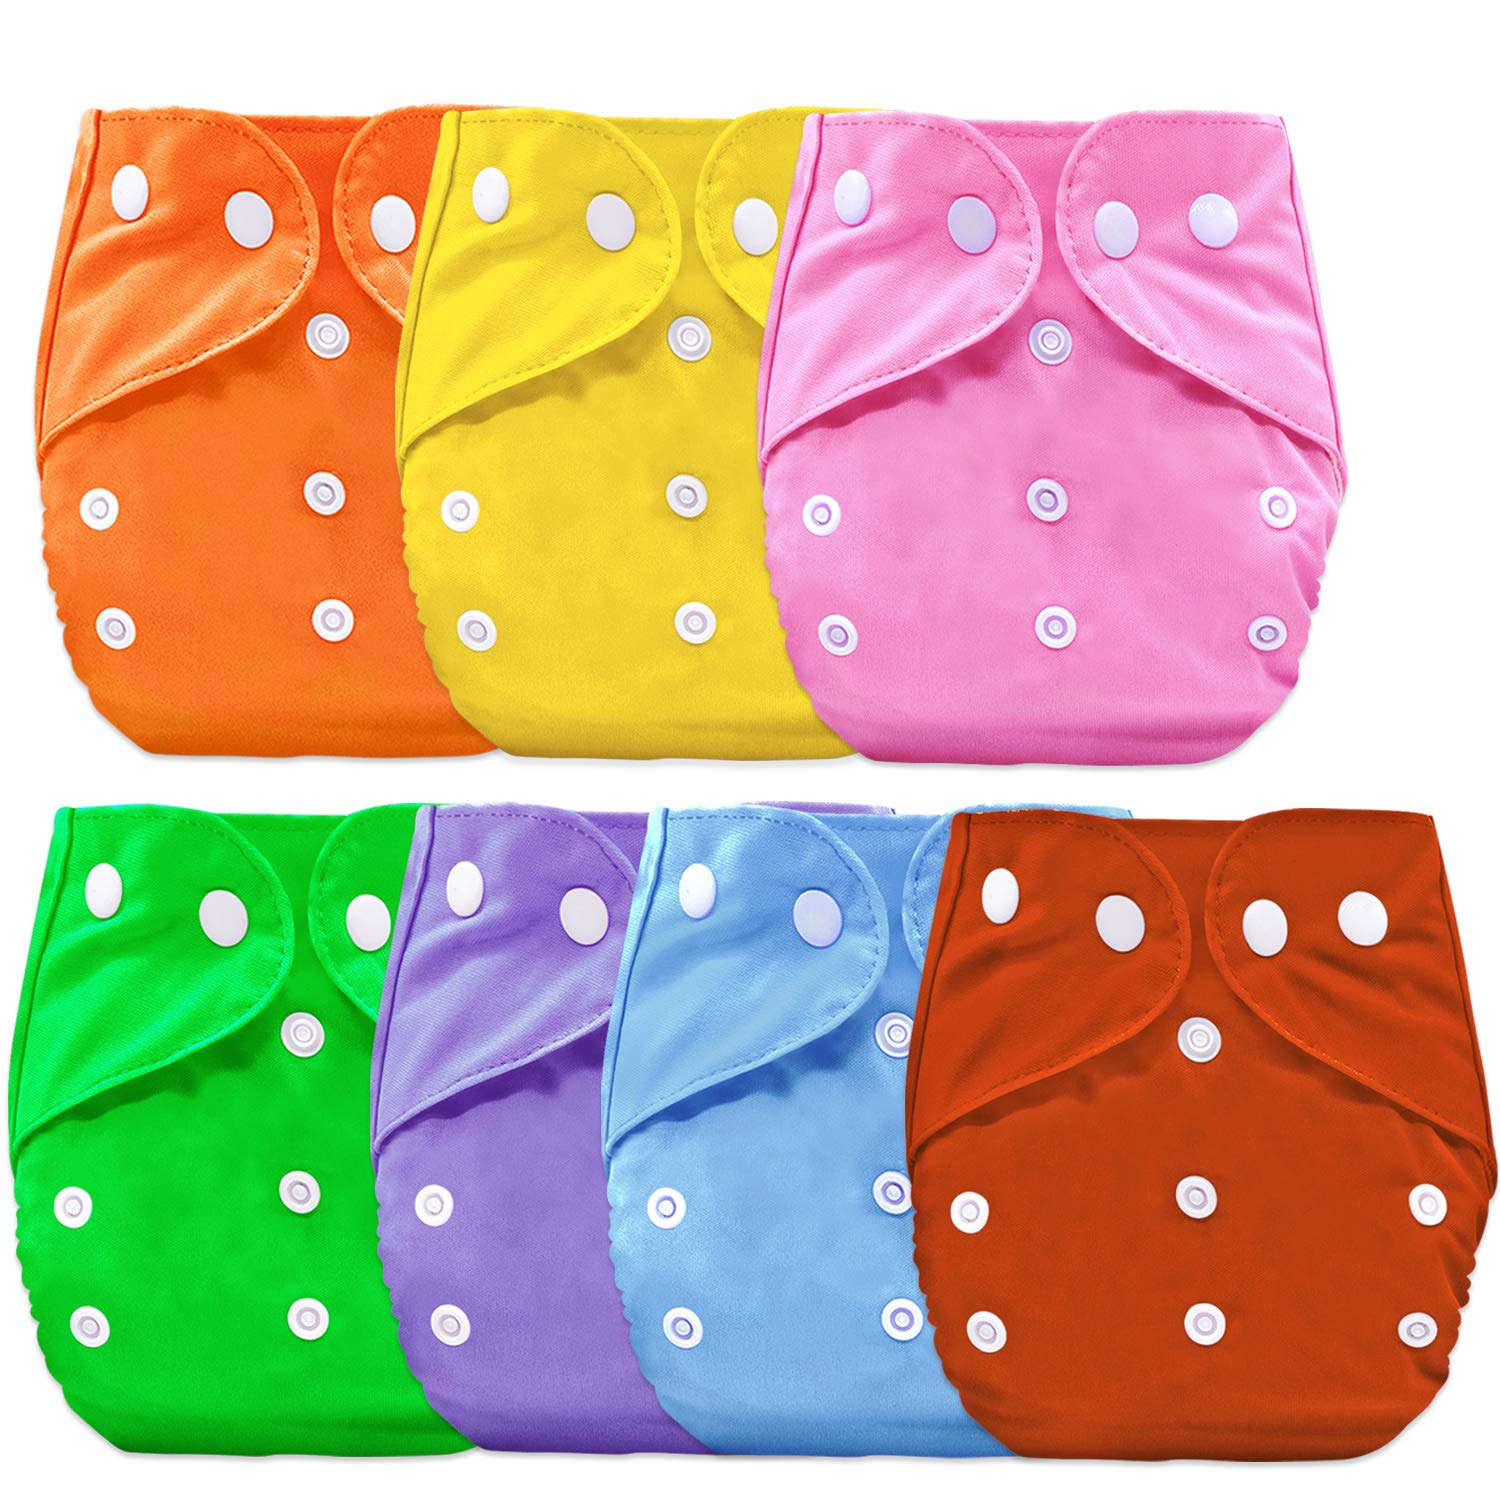 1 Pc Reusable Baby Infant Nappy Cloth Washable Diapers Covers Adjustable Grace 